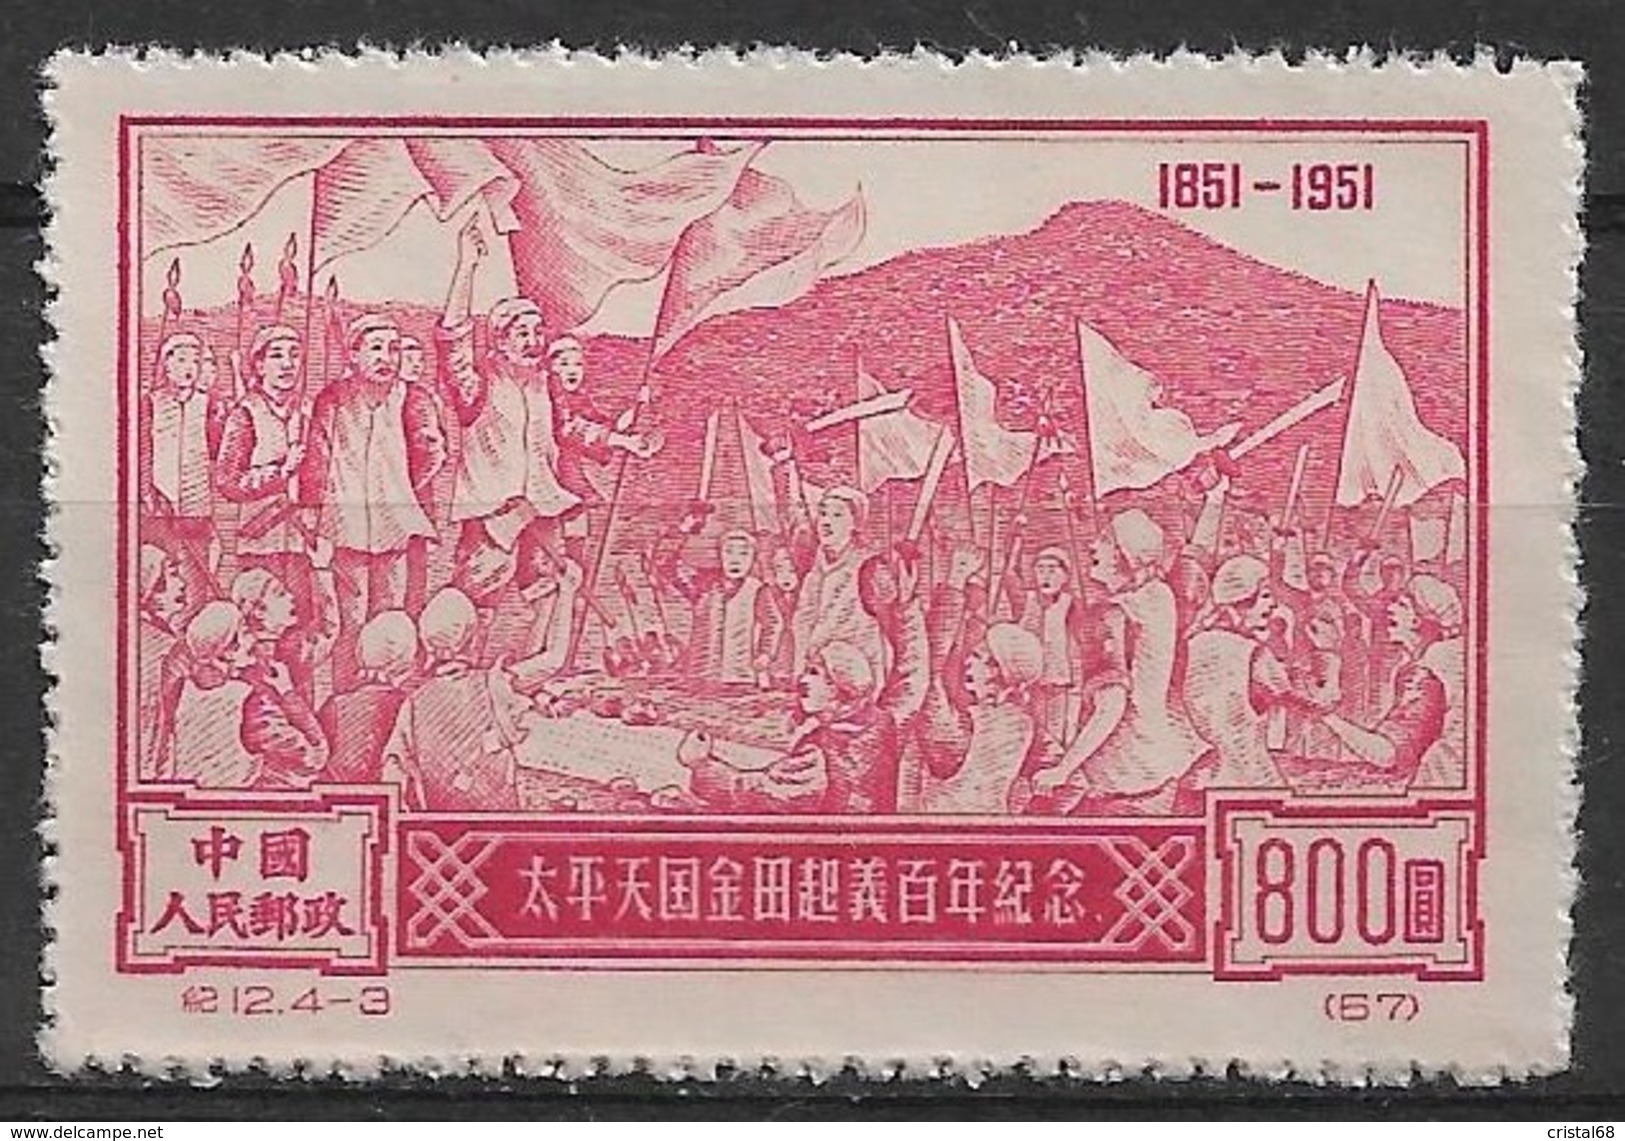 CHINE 1951 - Timbre N°921 - Neuf - Official Reprints